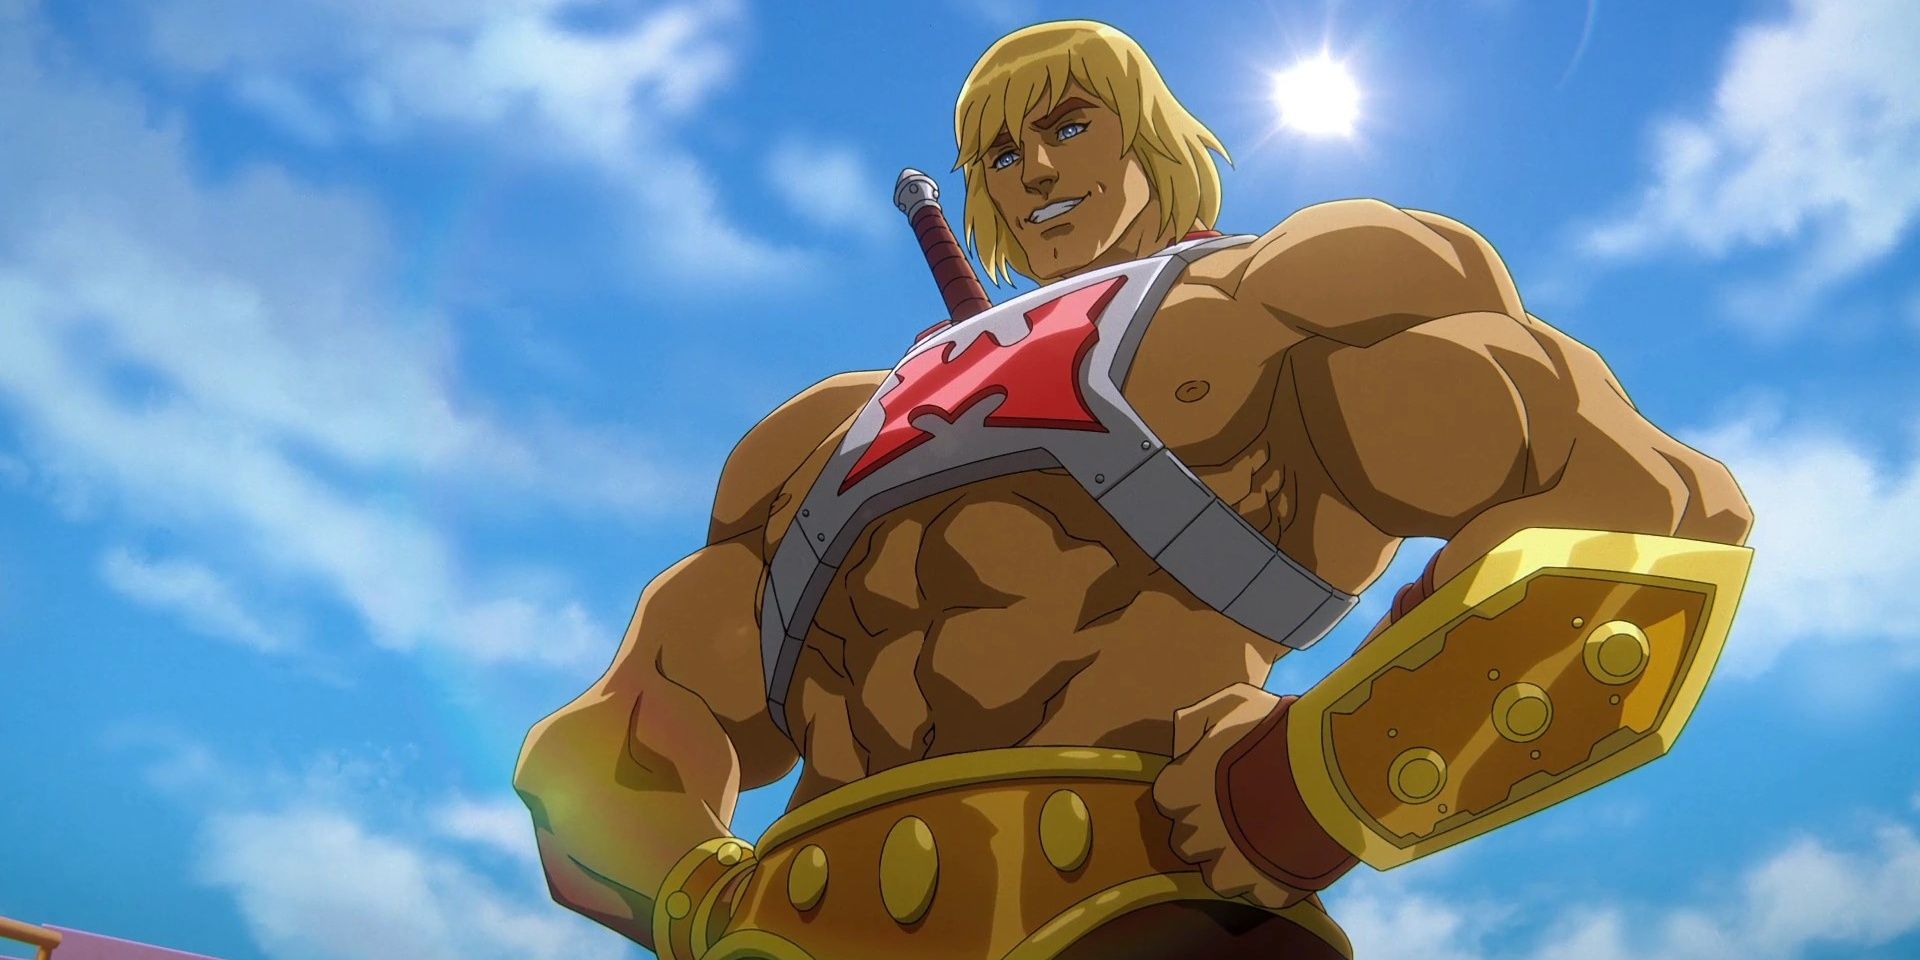 he-man in netflix animated show